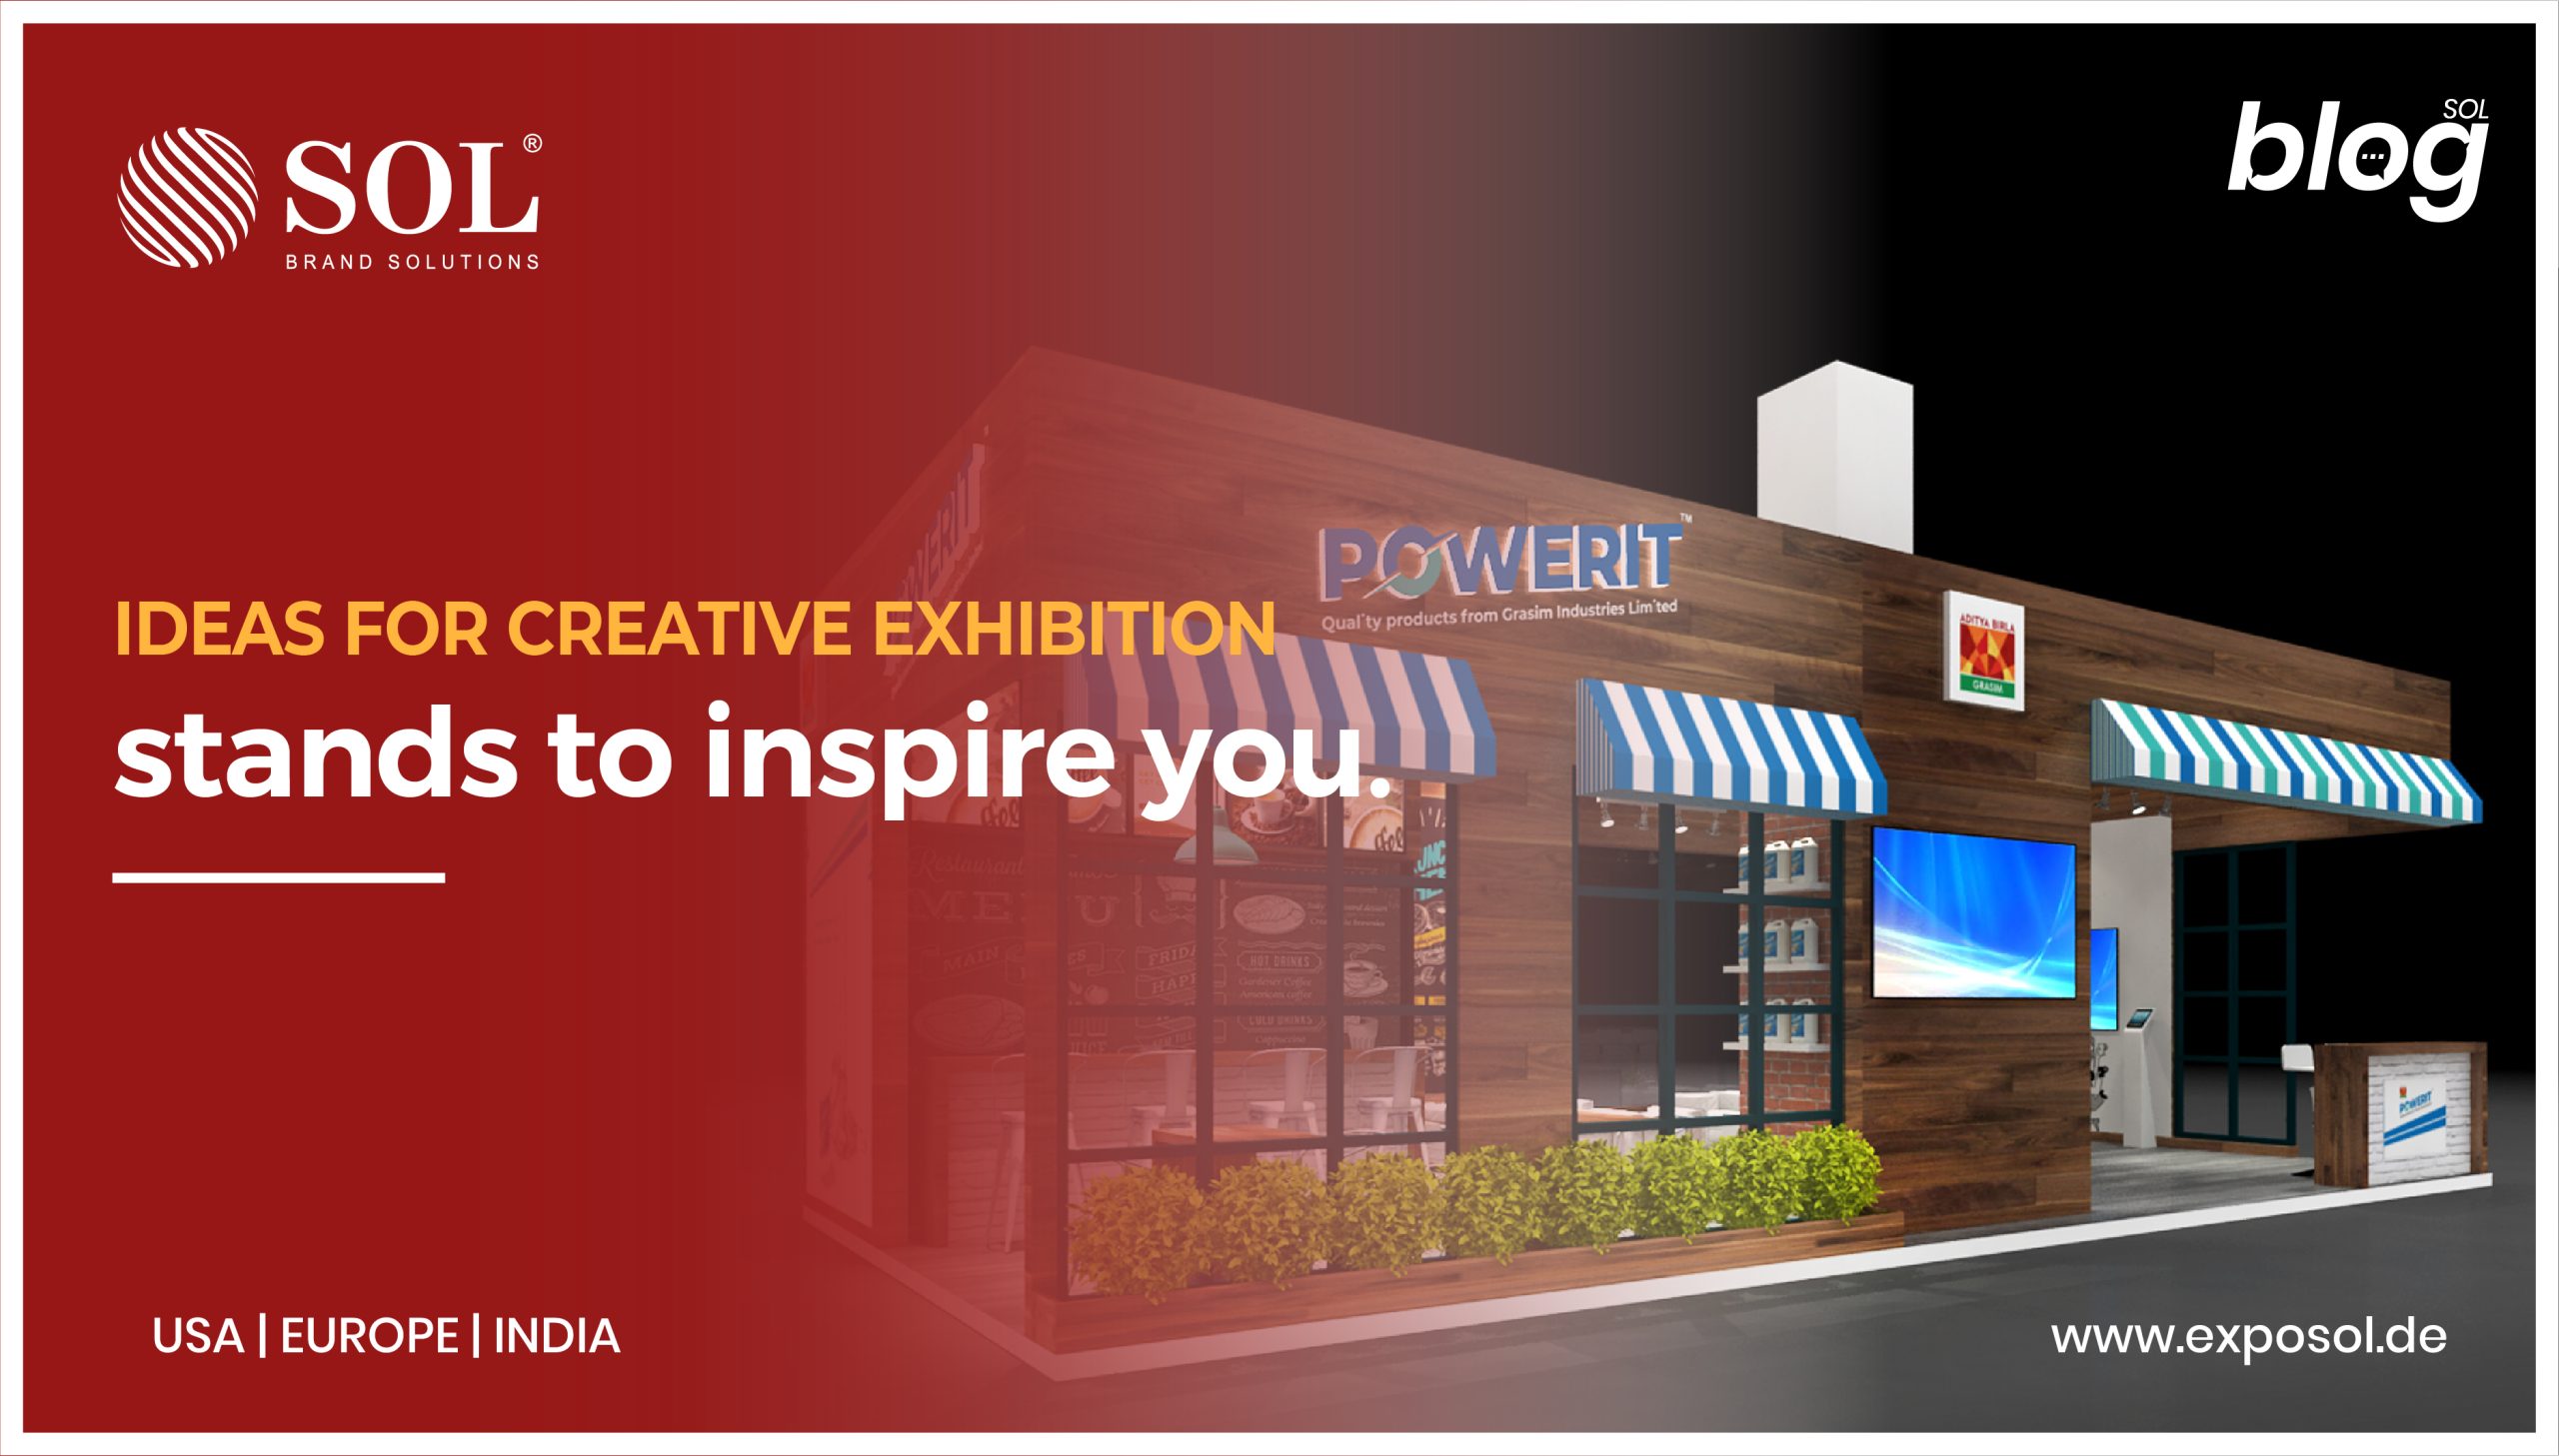 Ideas for creative exhibition stands to inspire you.